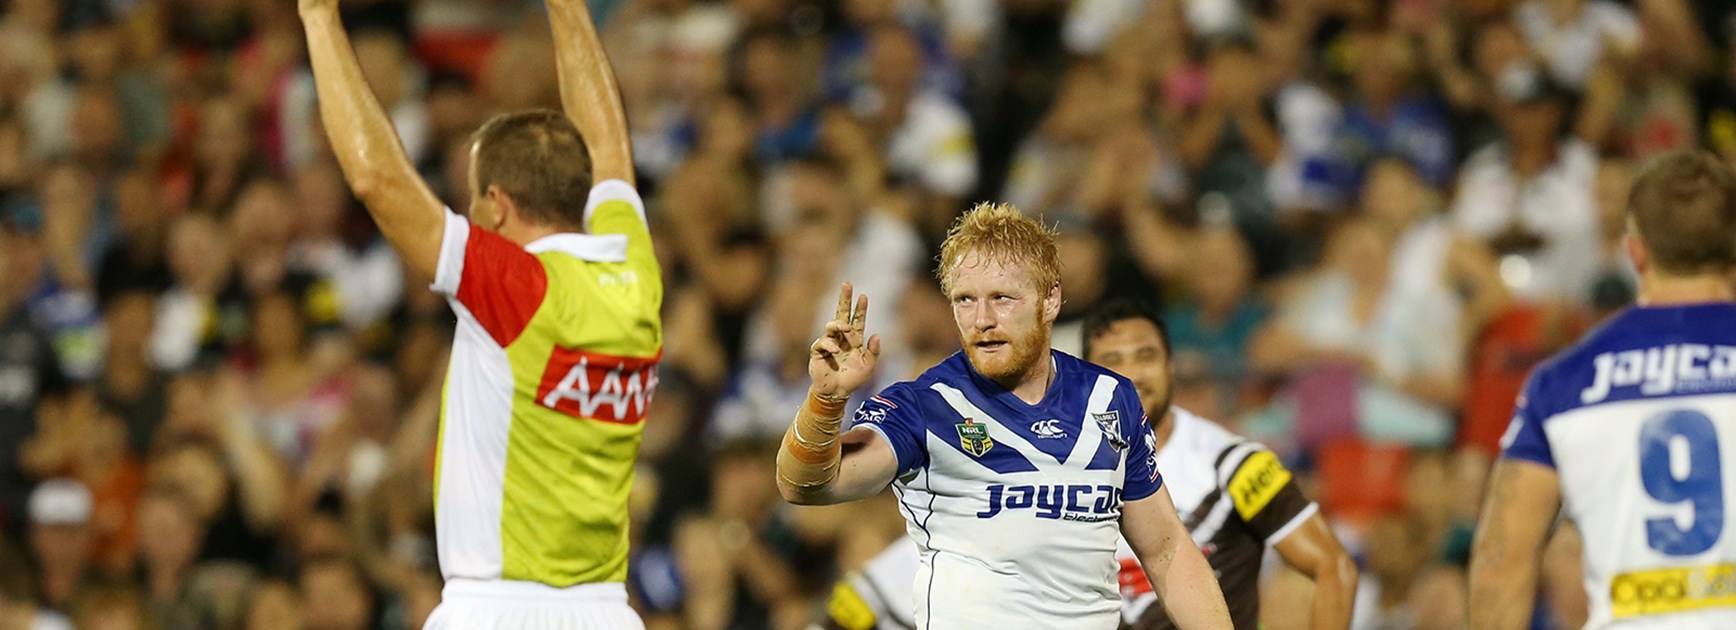 Bulldogs captain James Graham was not charged by the Match Review Committee after a possible shoulder charge in Round 2.